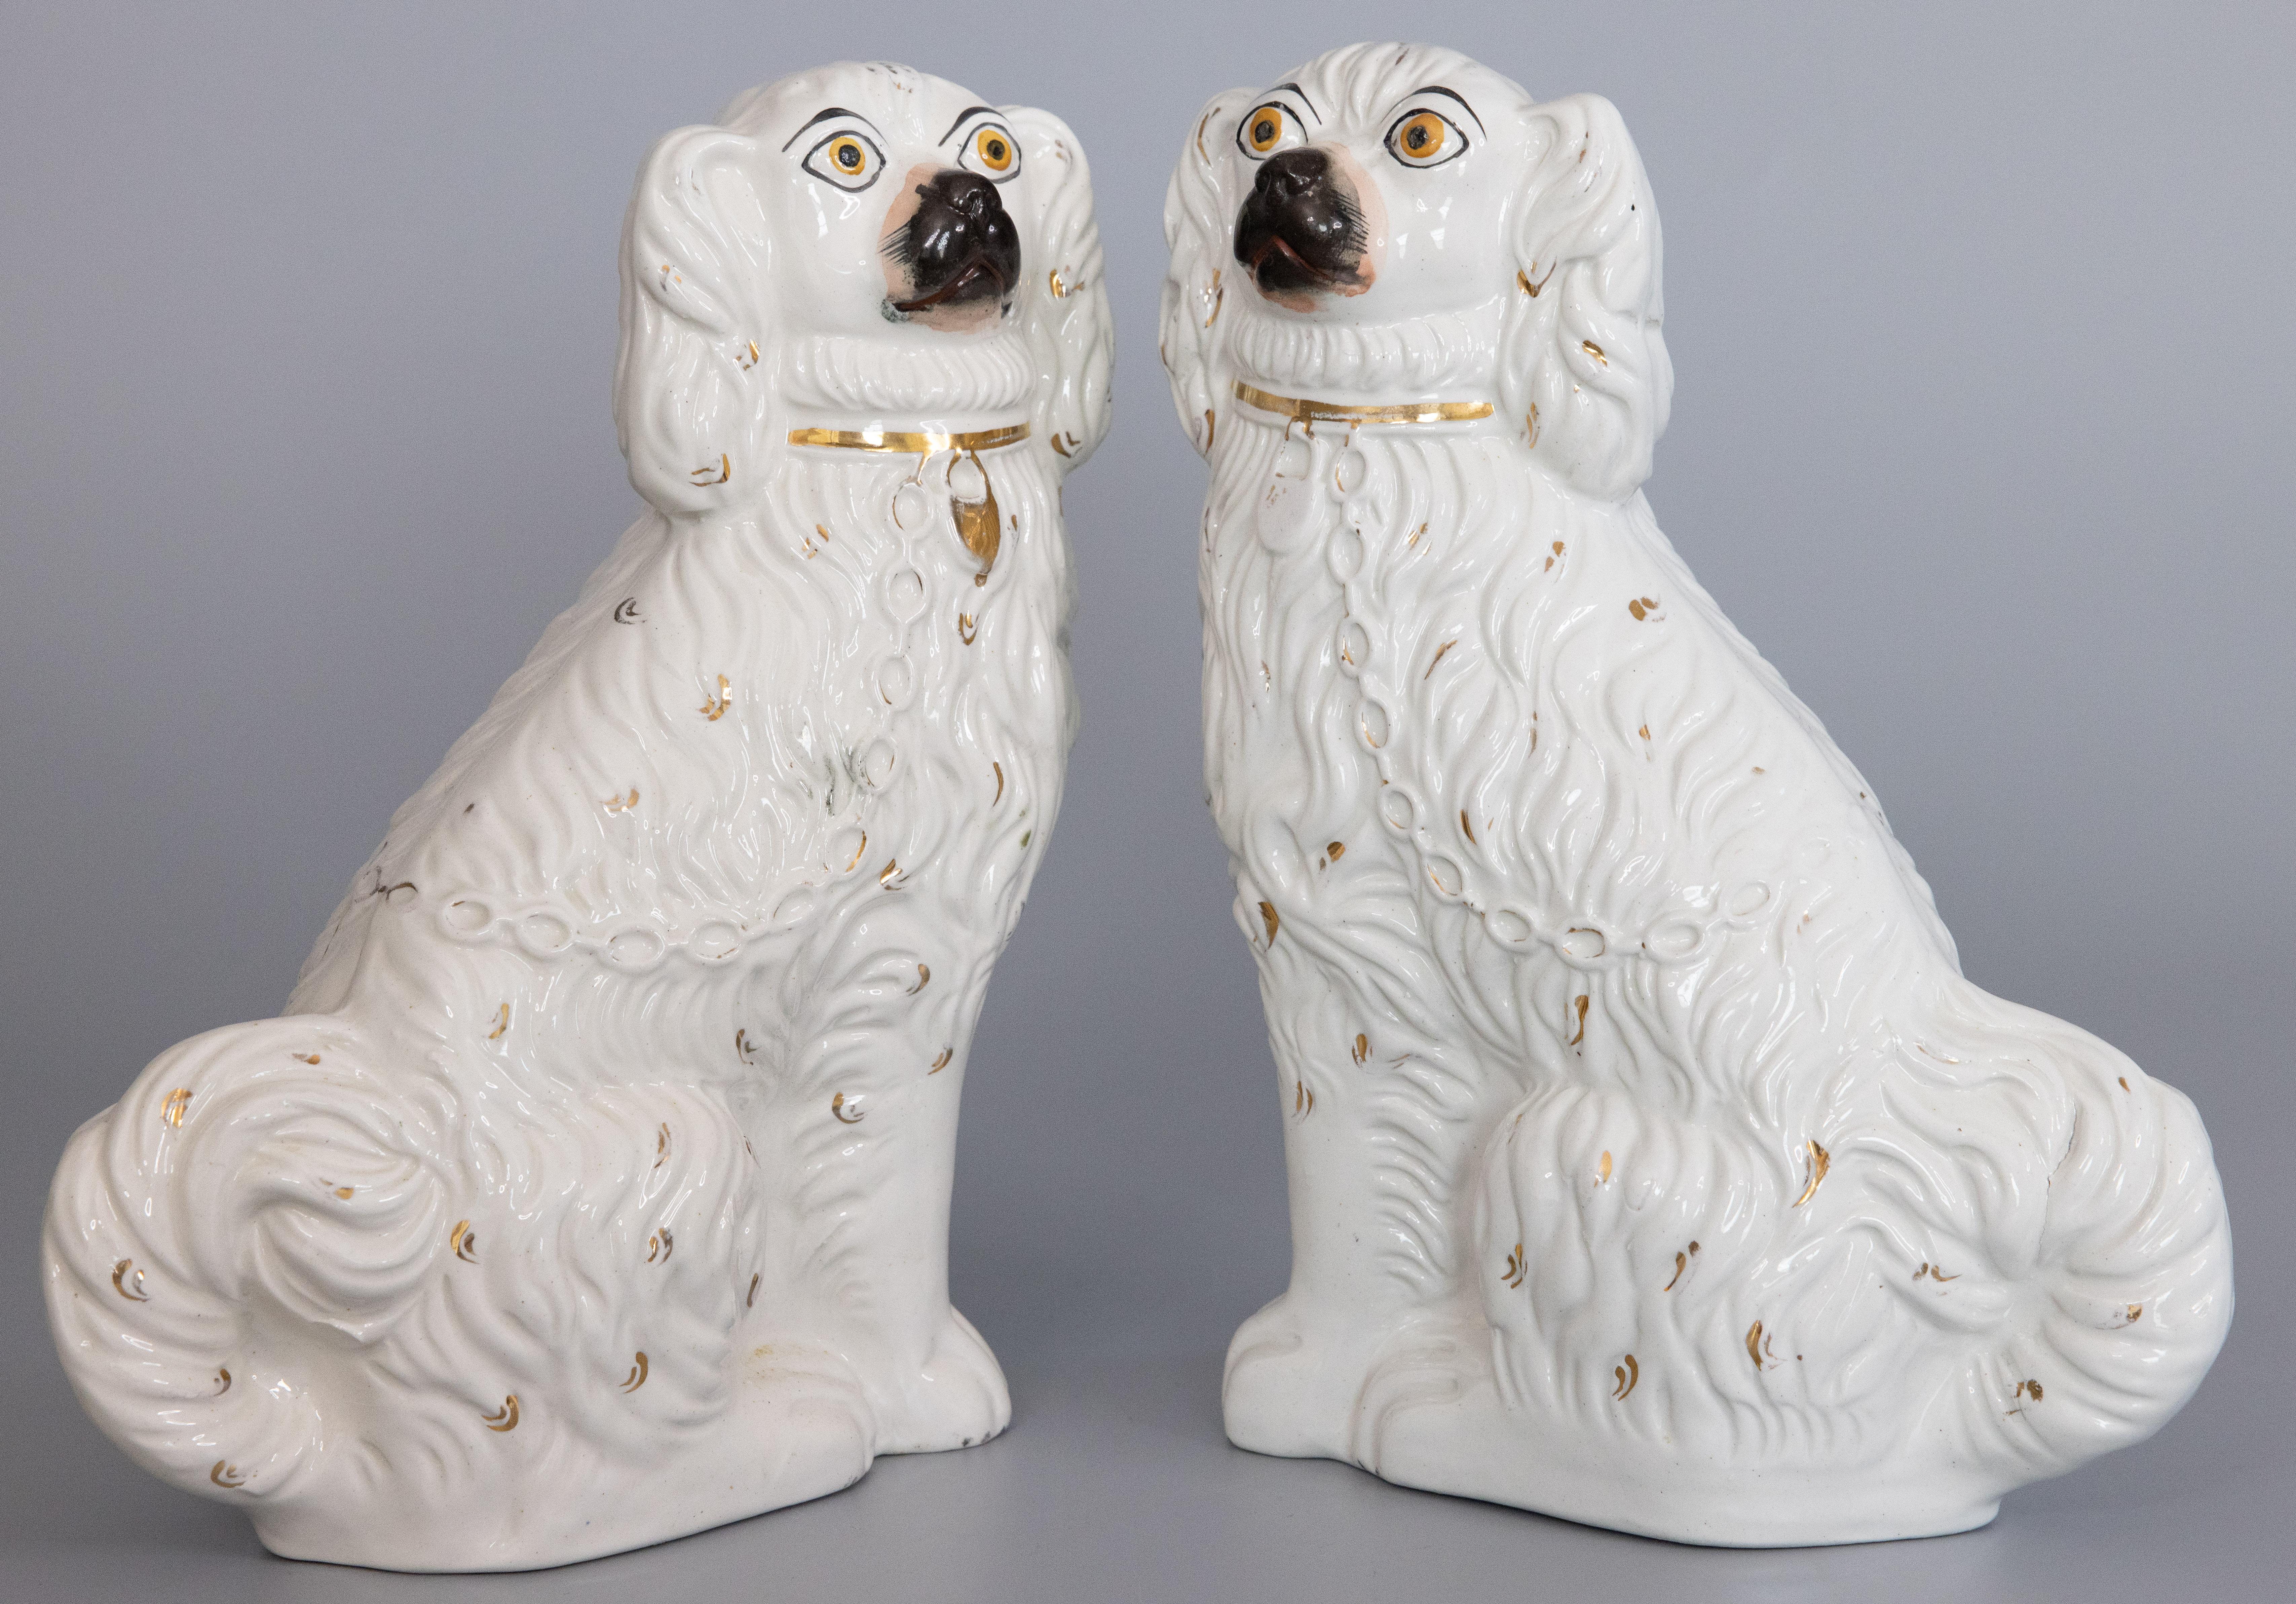 A fine pair of 19th Century English Staffordshire mantel dogs. These charming dogs are hand painted with lovely gilt details, sweet faces, and are a nice large size. They are the perfect Victorian pair of dogs for your mantel, bookcase or table.

